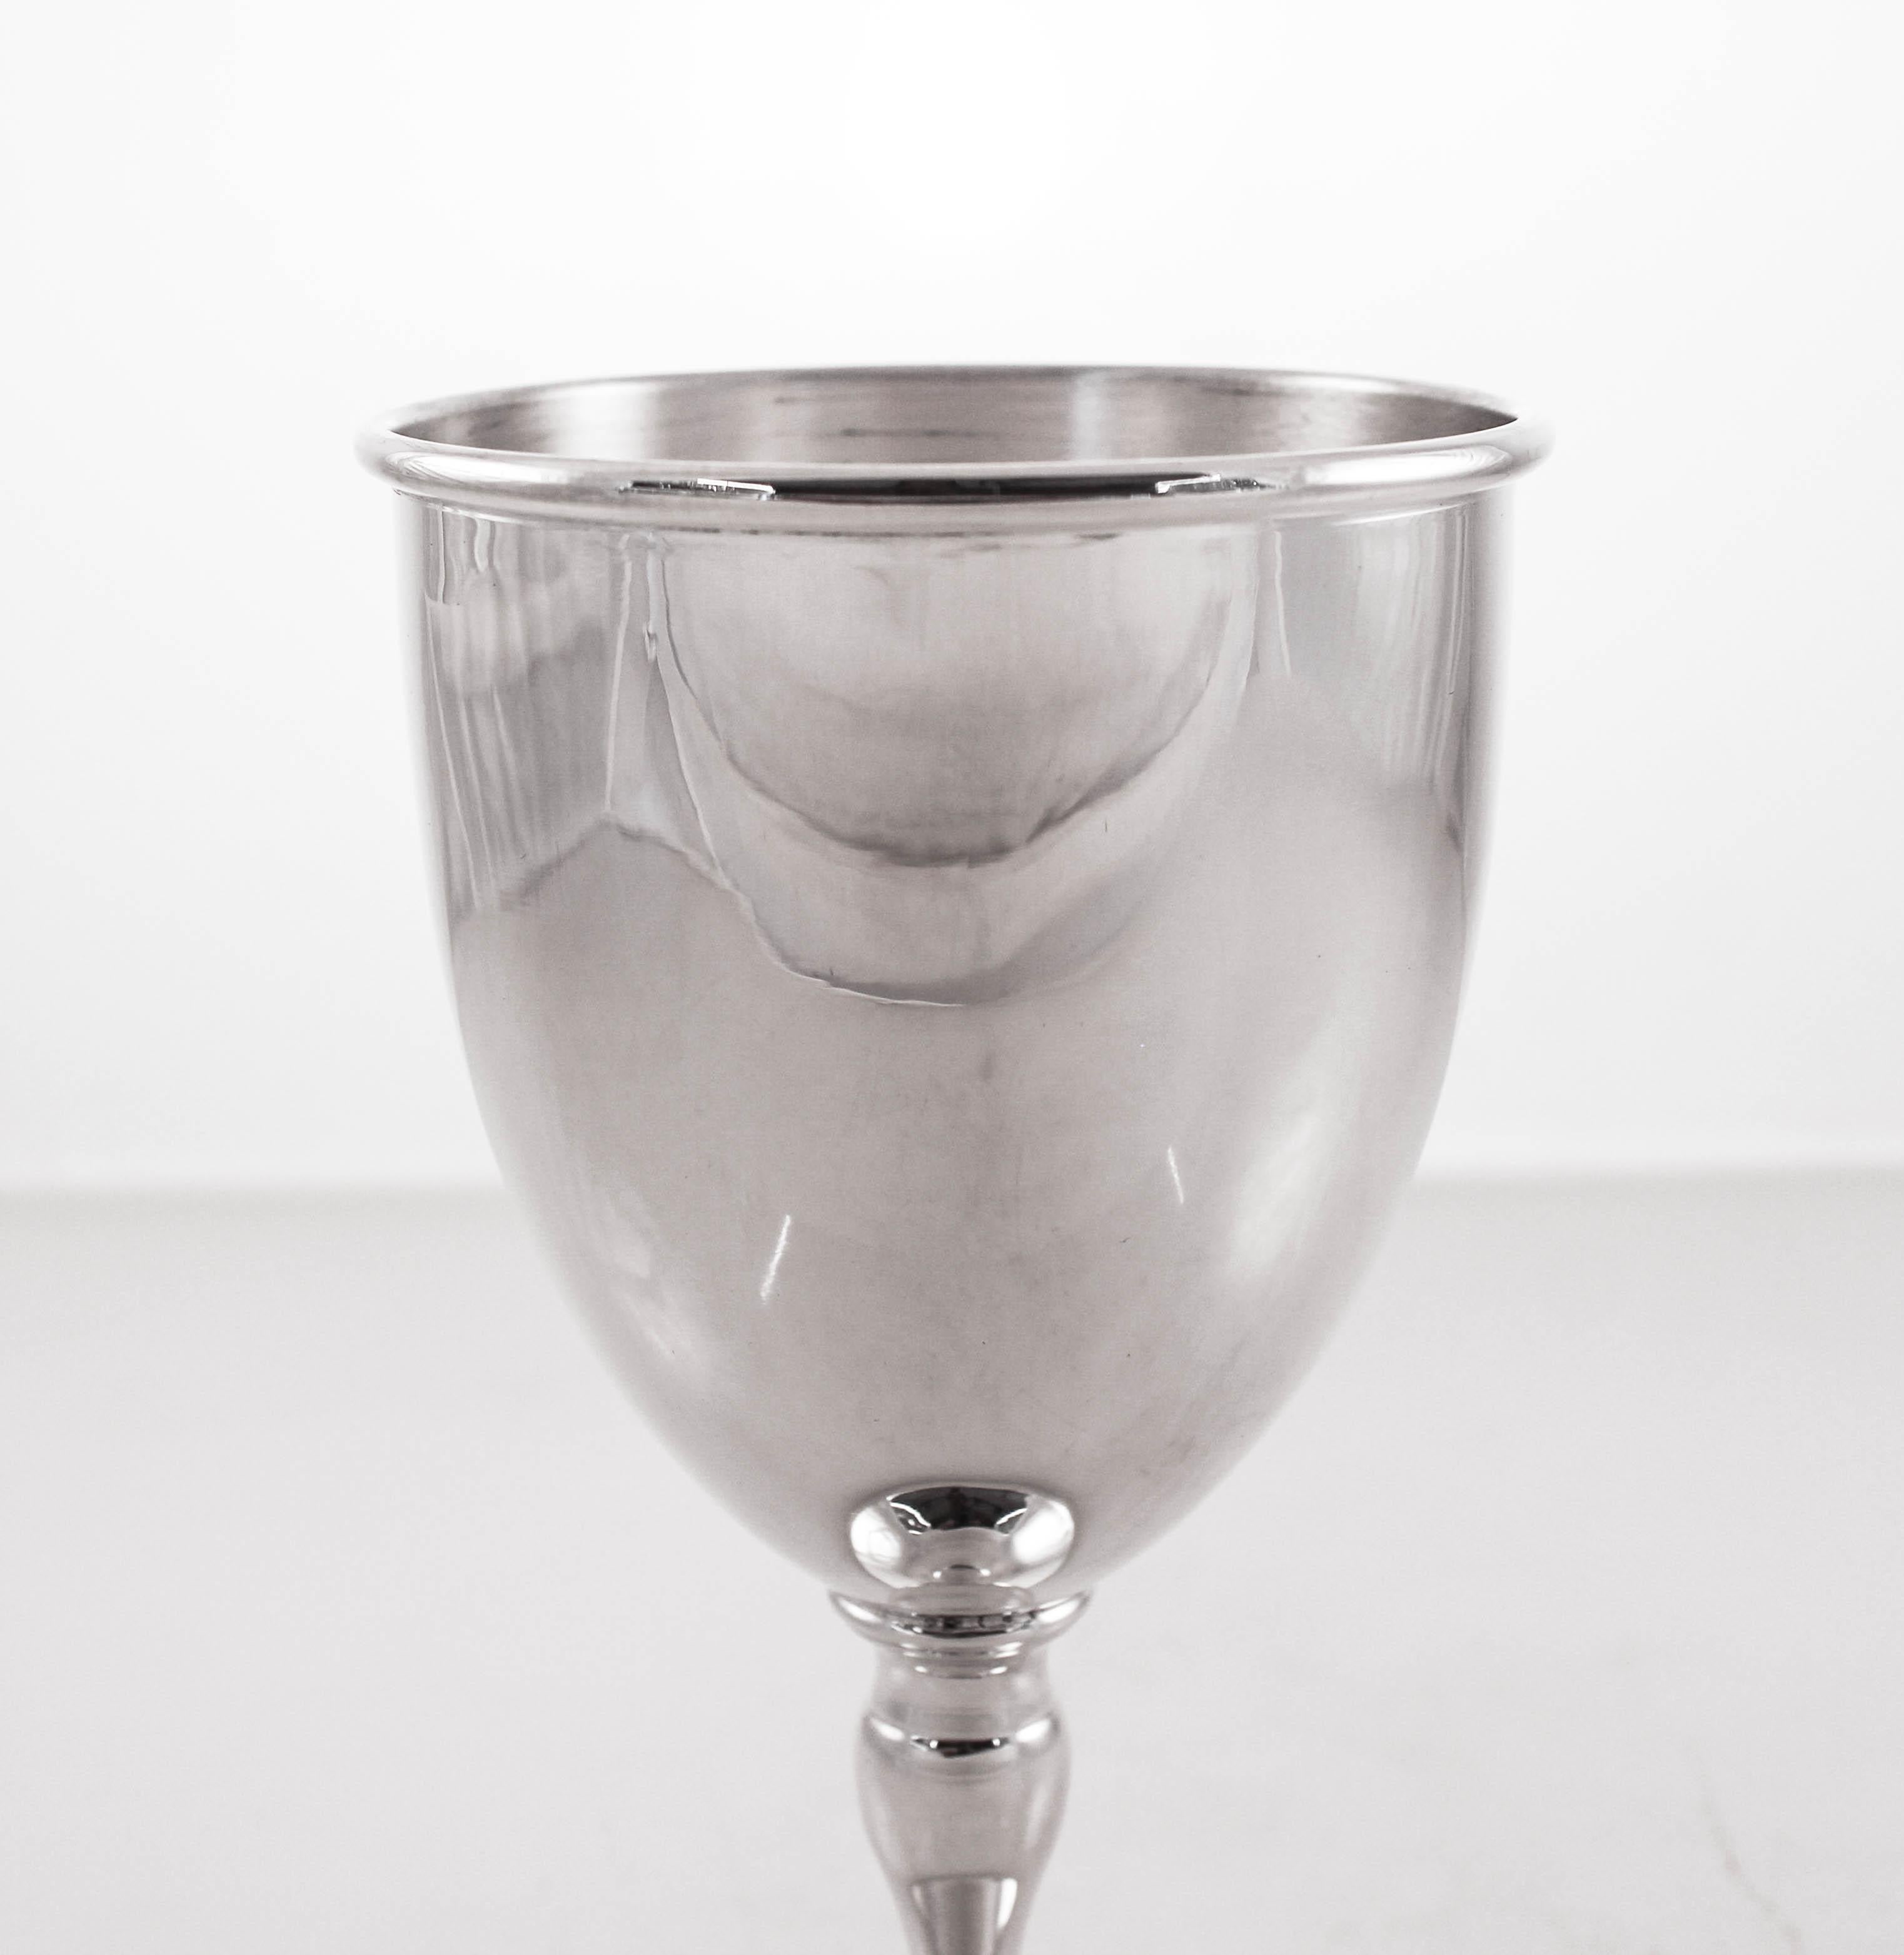 A sterling silver goblet will enhance any dinner table. Elegant and understated, it has no etchings or decoration on it. Just a clean, midcentury feel. Perfect for a synagogue or church service. So whether for holidays, Shabbat, or just for the